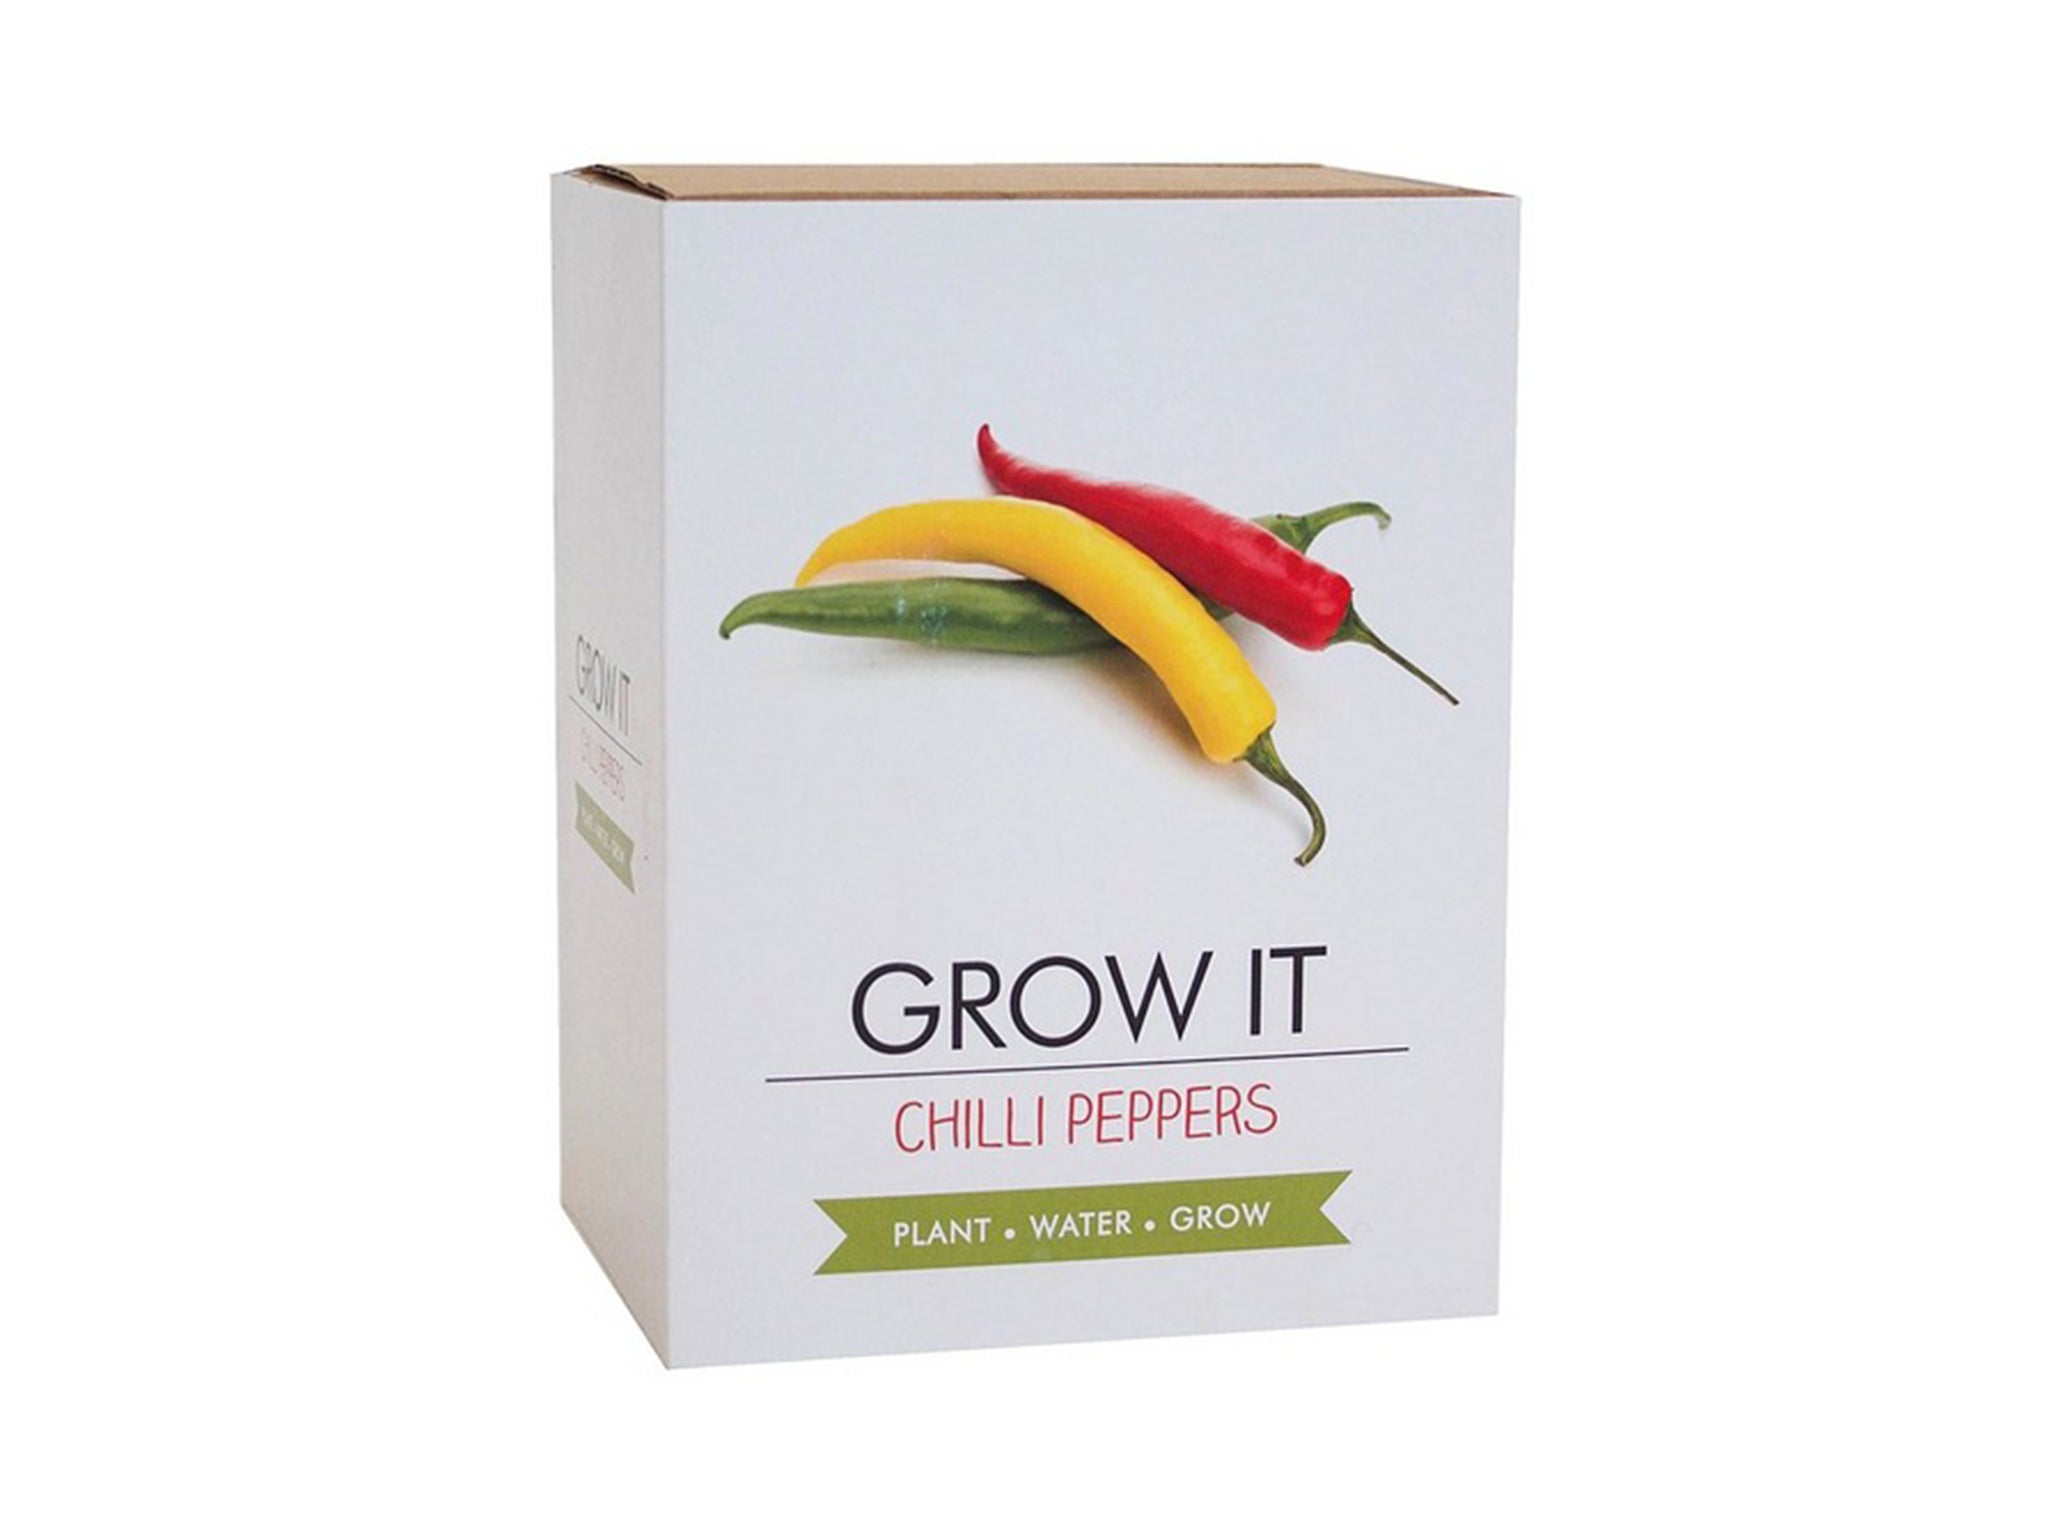 Growing your own chilli peppers will mean you can spice up dishes in the kitchen without leaving your house